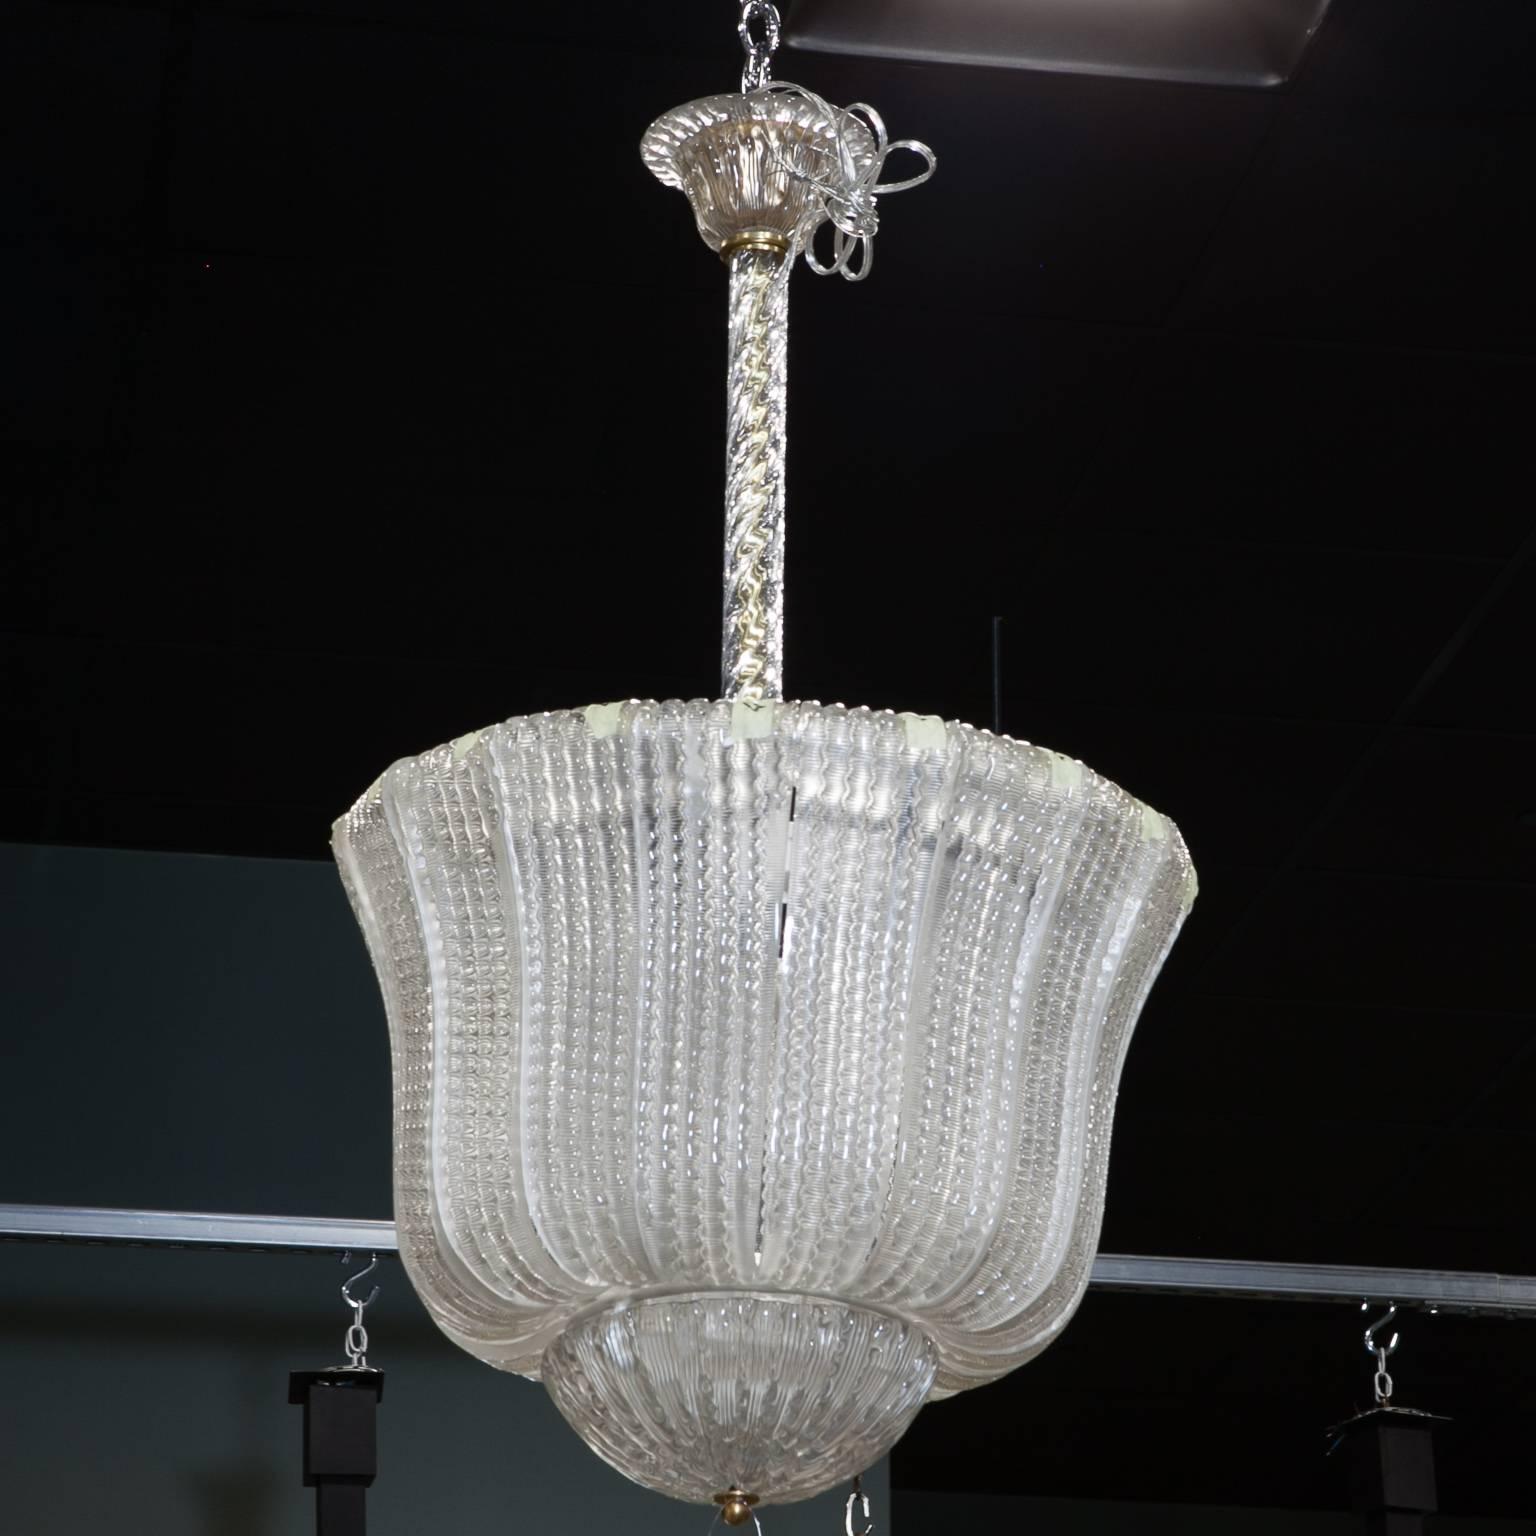 Barovier & Toso clear glass hanging fixture with curved, ribbed sides, four internal candelabra size sockets and a thick clear glass center shaft and ceiling canopy, circa 1940s. New wiring for US electrical standards. Multiple fixtures of this size